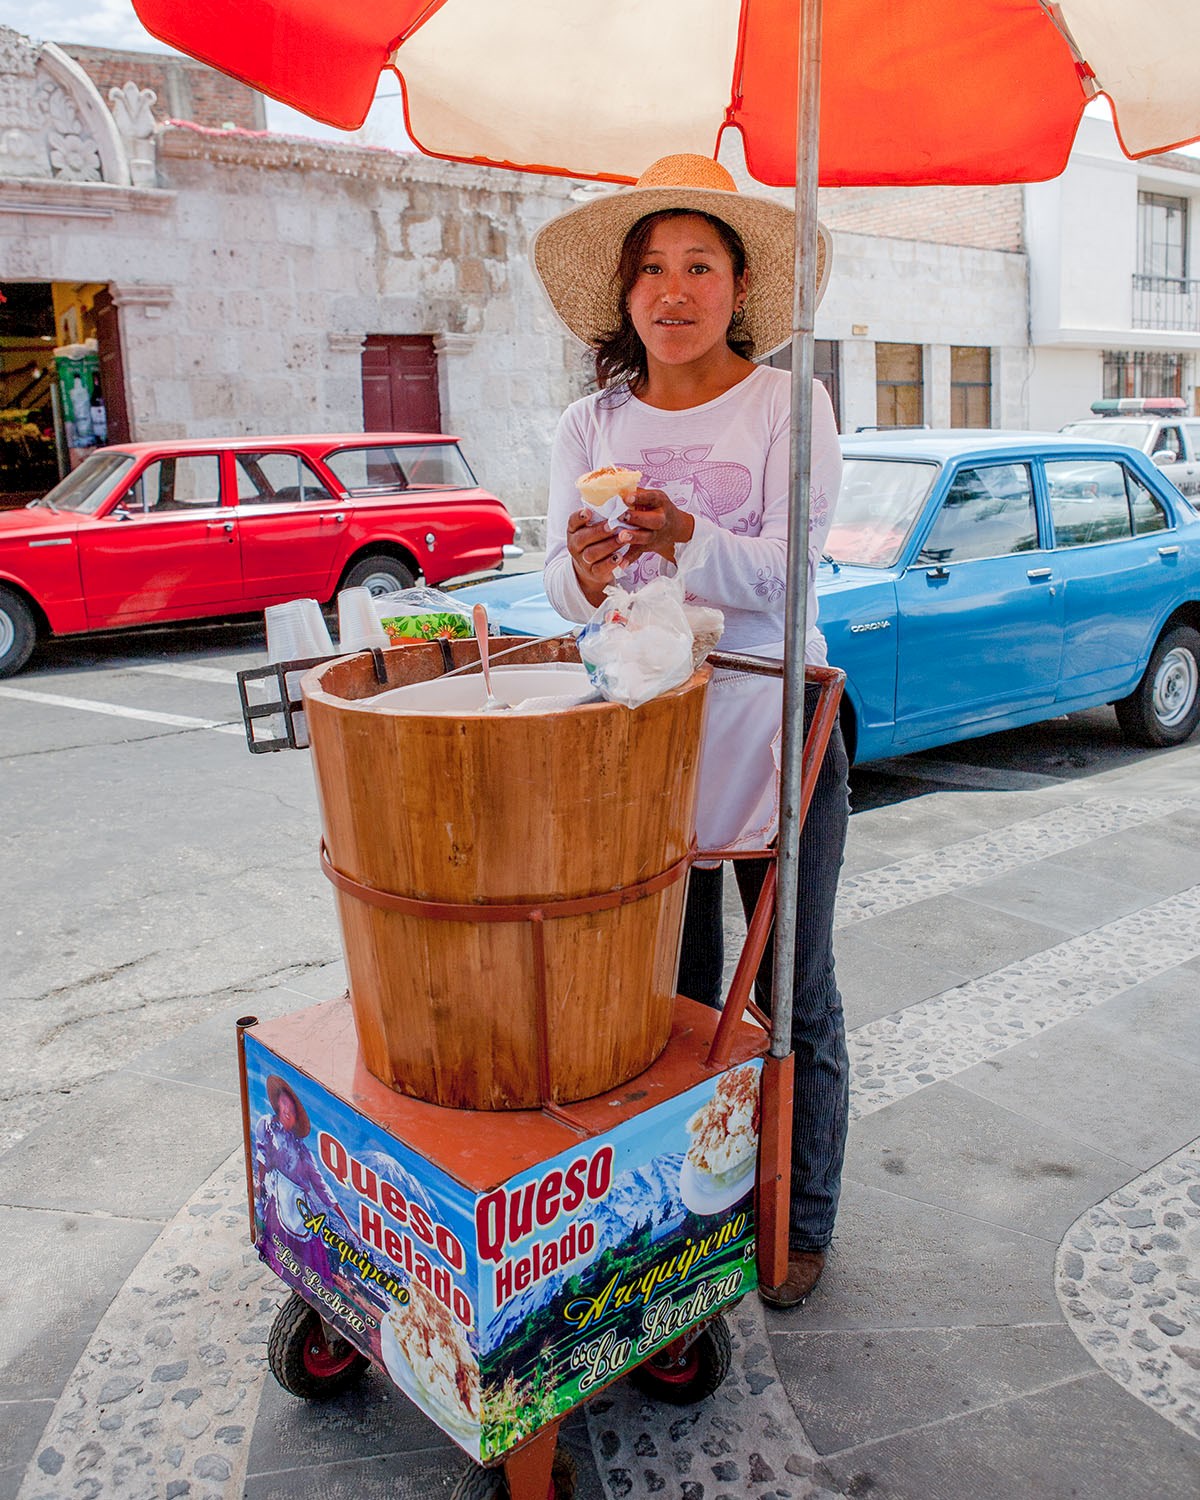 Queso helado ice cream is the most famous Arequipan dessert - 